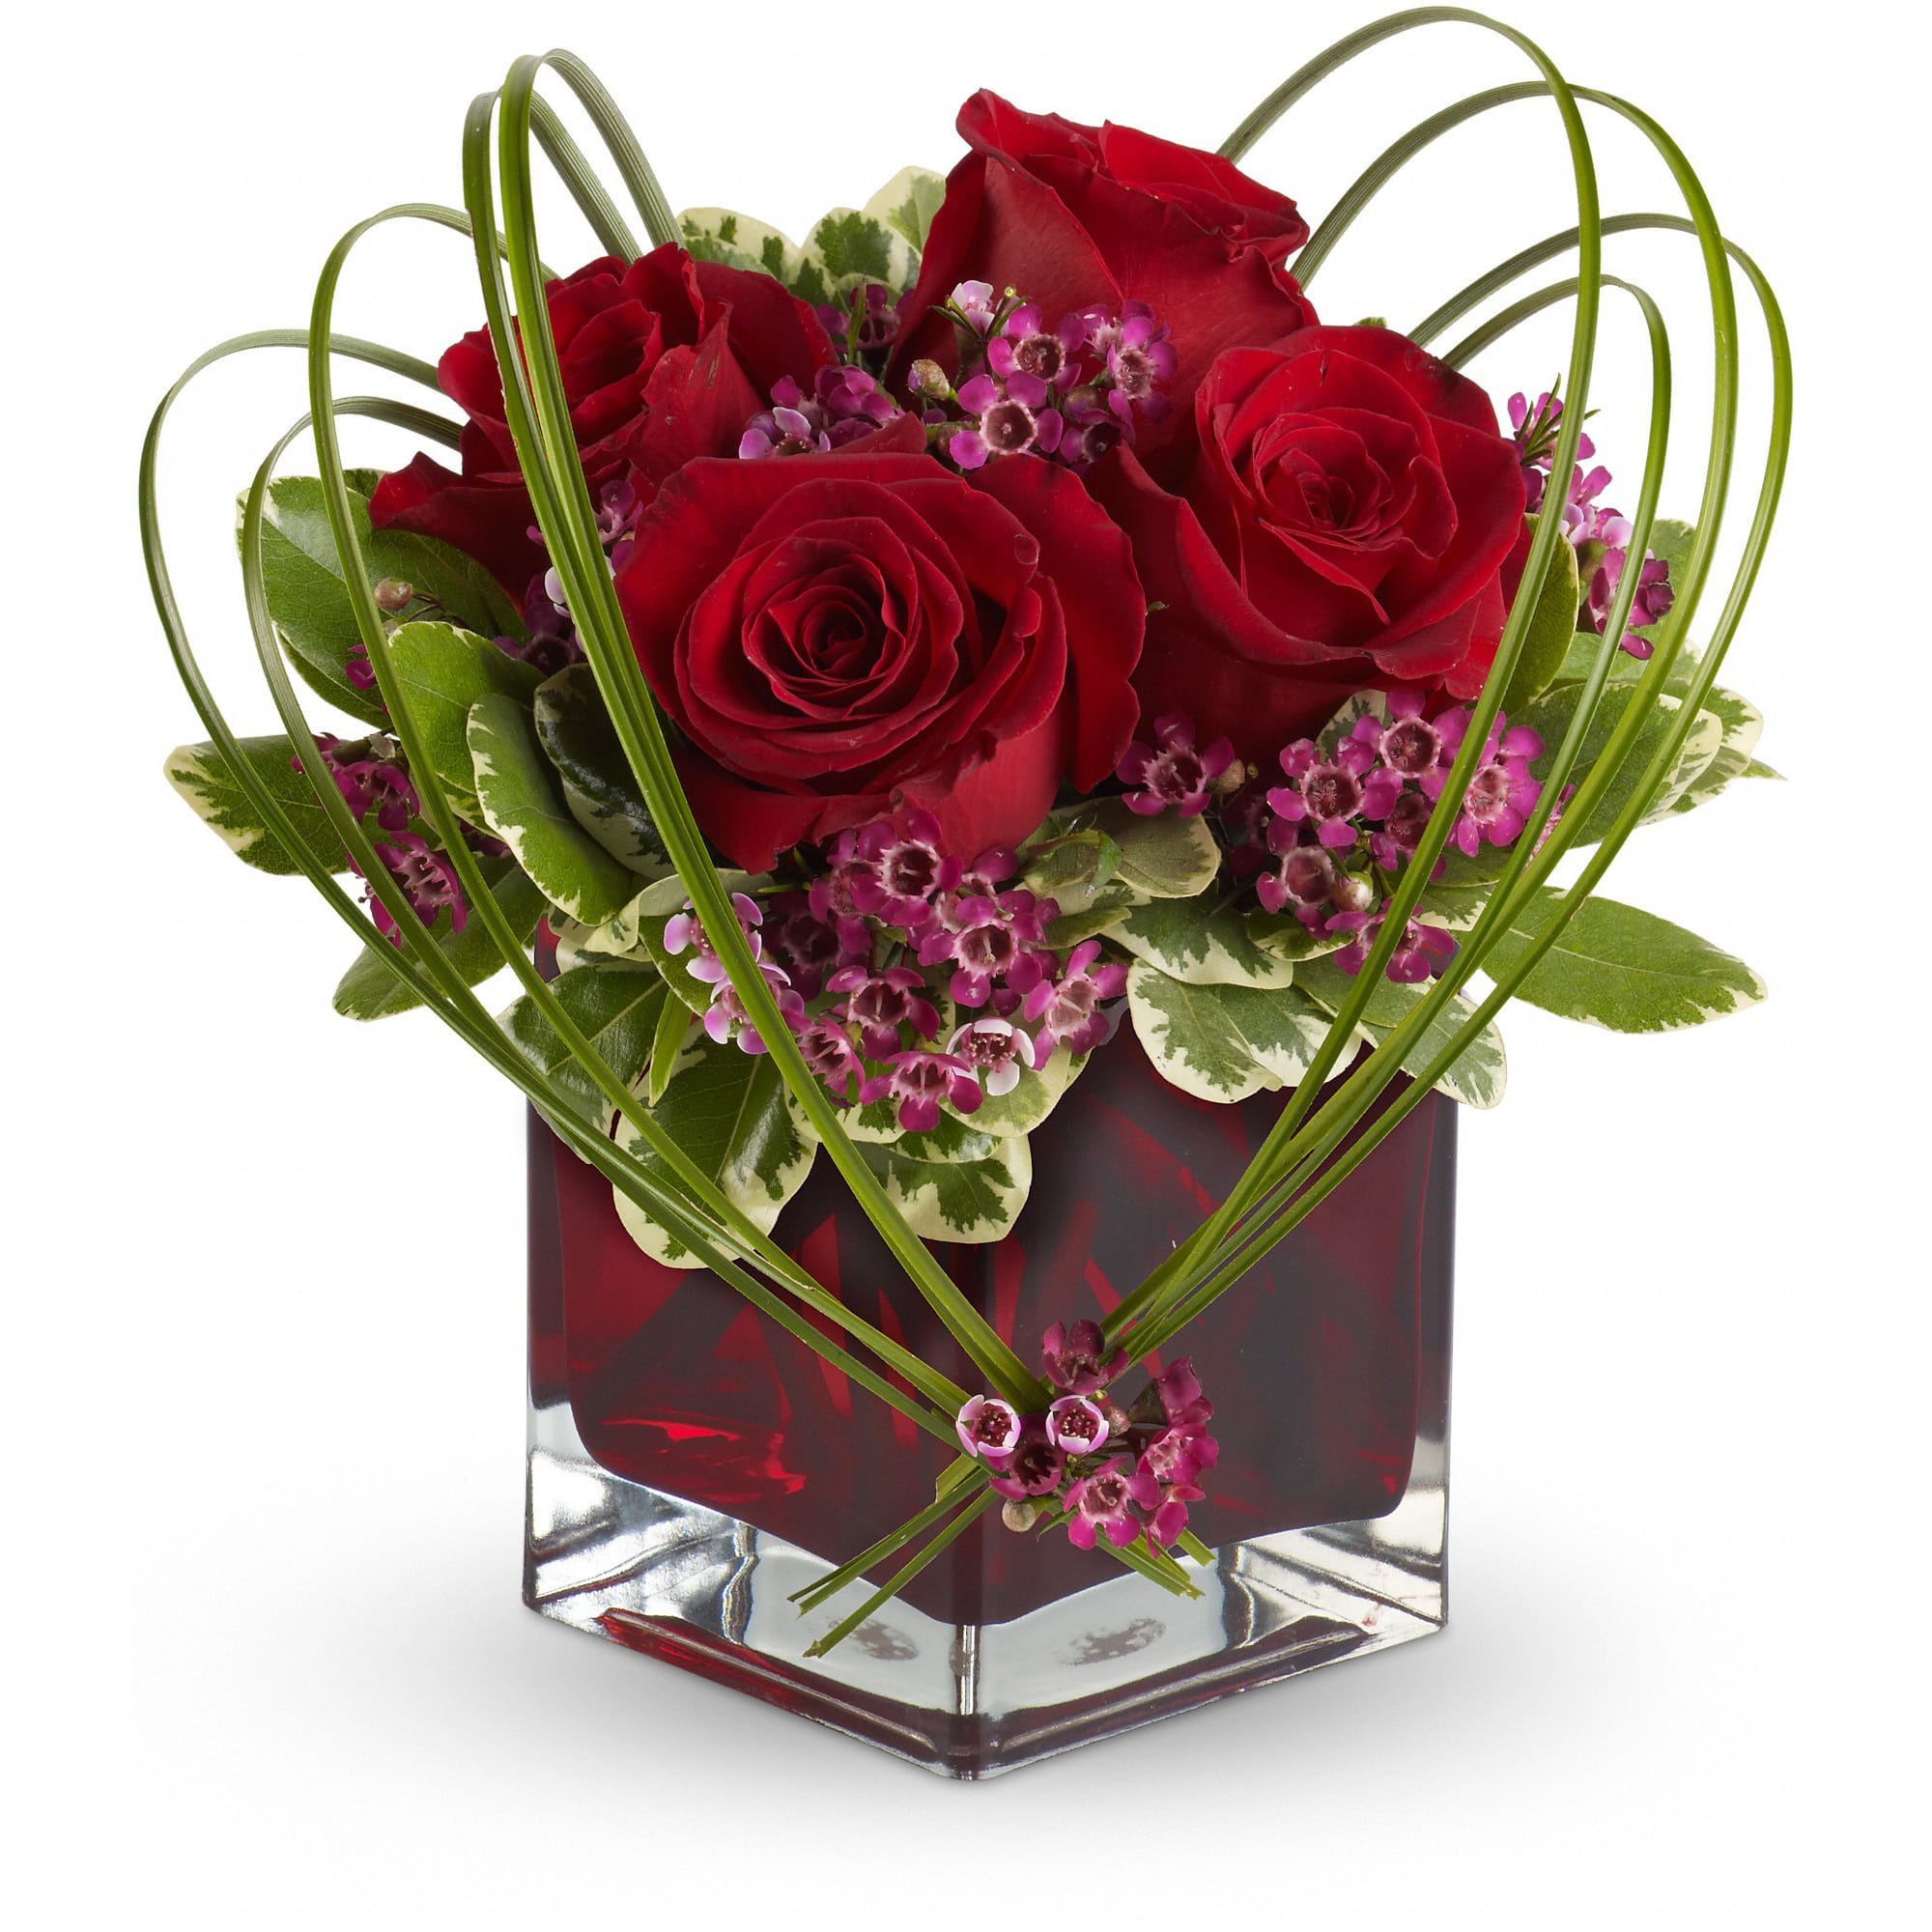 Teleflora's Sweet Thoughts Bouquet with Red Roses TEV13-7A - If you'd like someone to think sweet thoughts about you, send them this delightful bouquet! A graceful heart of bear grass is tied with purple waxflower, and appears to float above red roses nestled in a ruby-red glass vase. How sweet it is!  Standard TEV13-7A Deluxe TEV13-7B Premium TEV13-7C